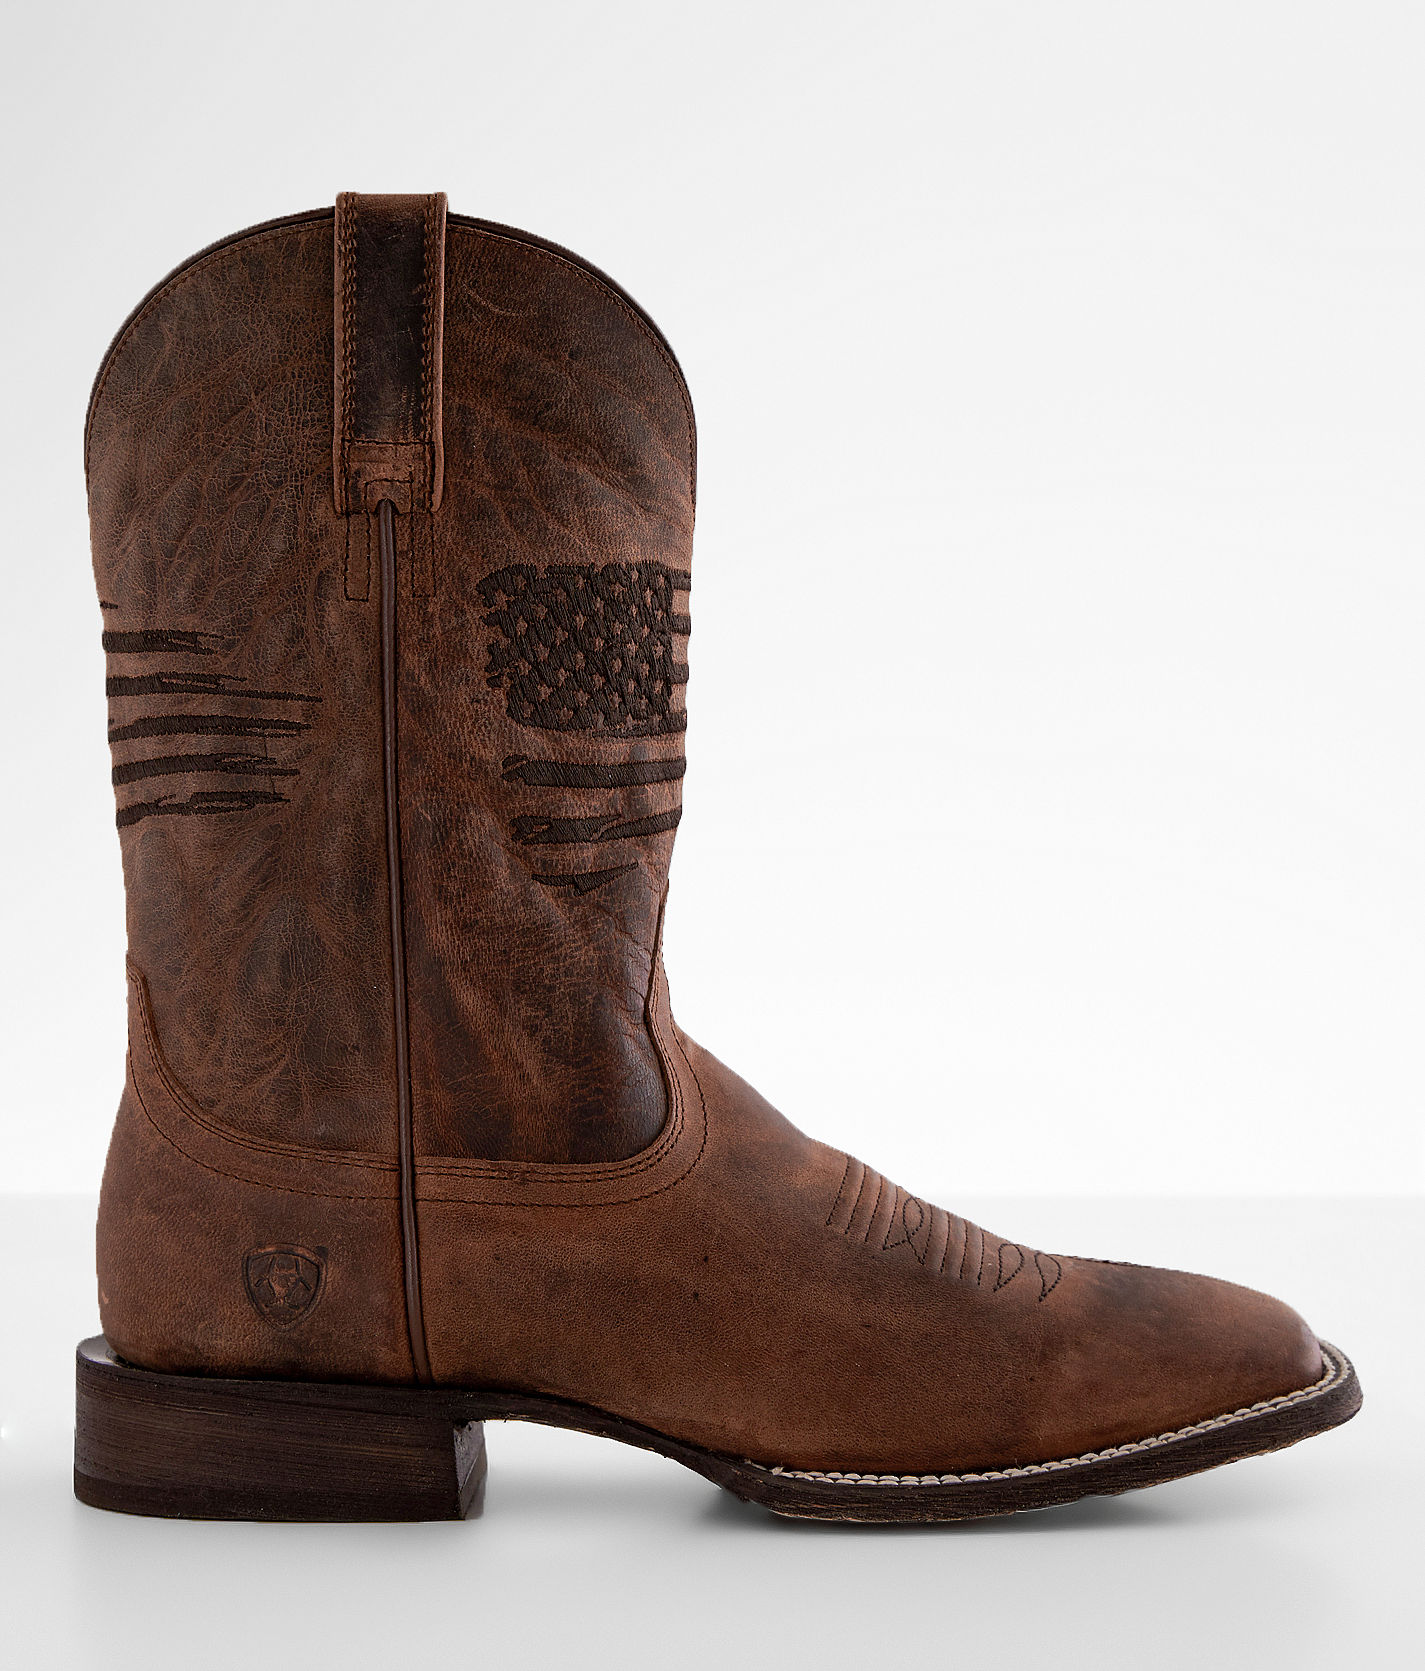 Ariat 10029699 Men's Weathered Tan Circuit Patriot Wide Square Toe Western Boot